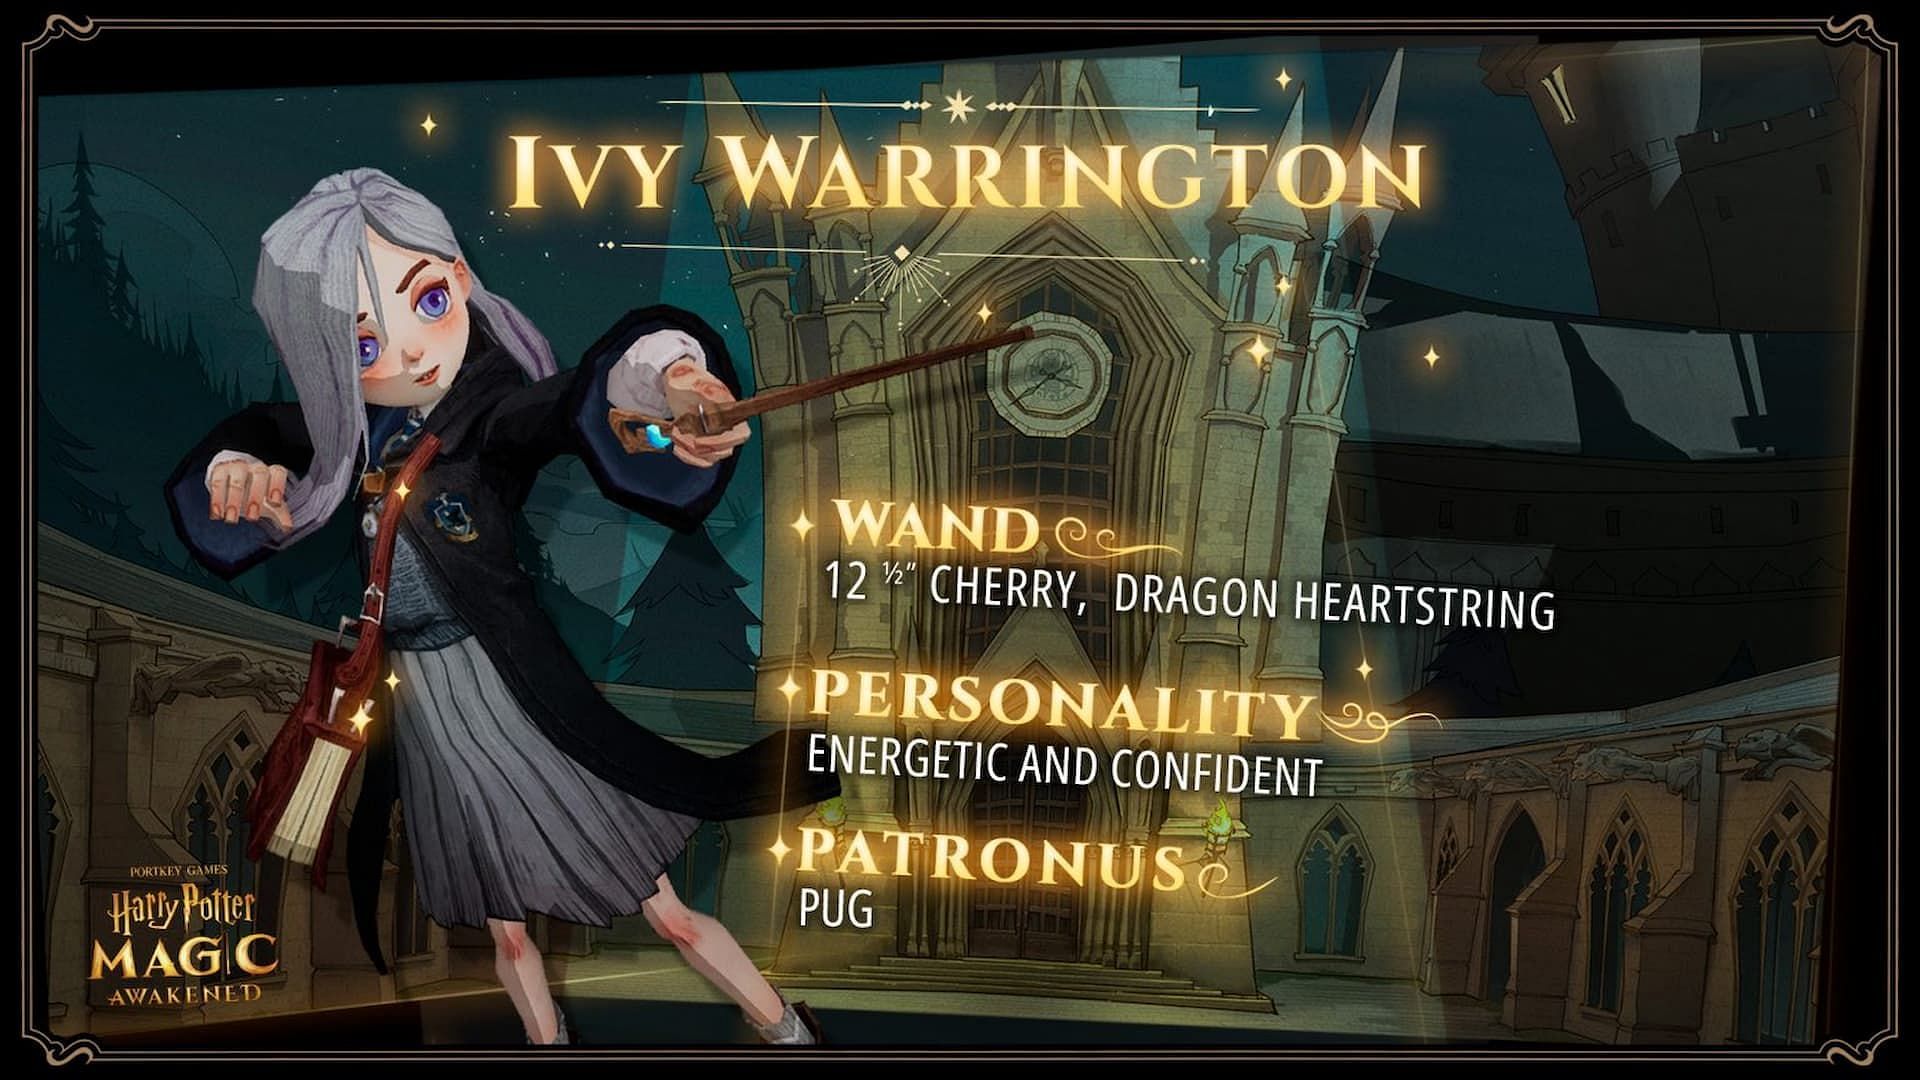 Ivy Warrington is a new character in Harry Potter Magic Awakened (Image via WB Games)